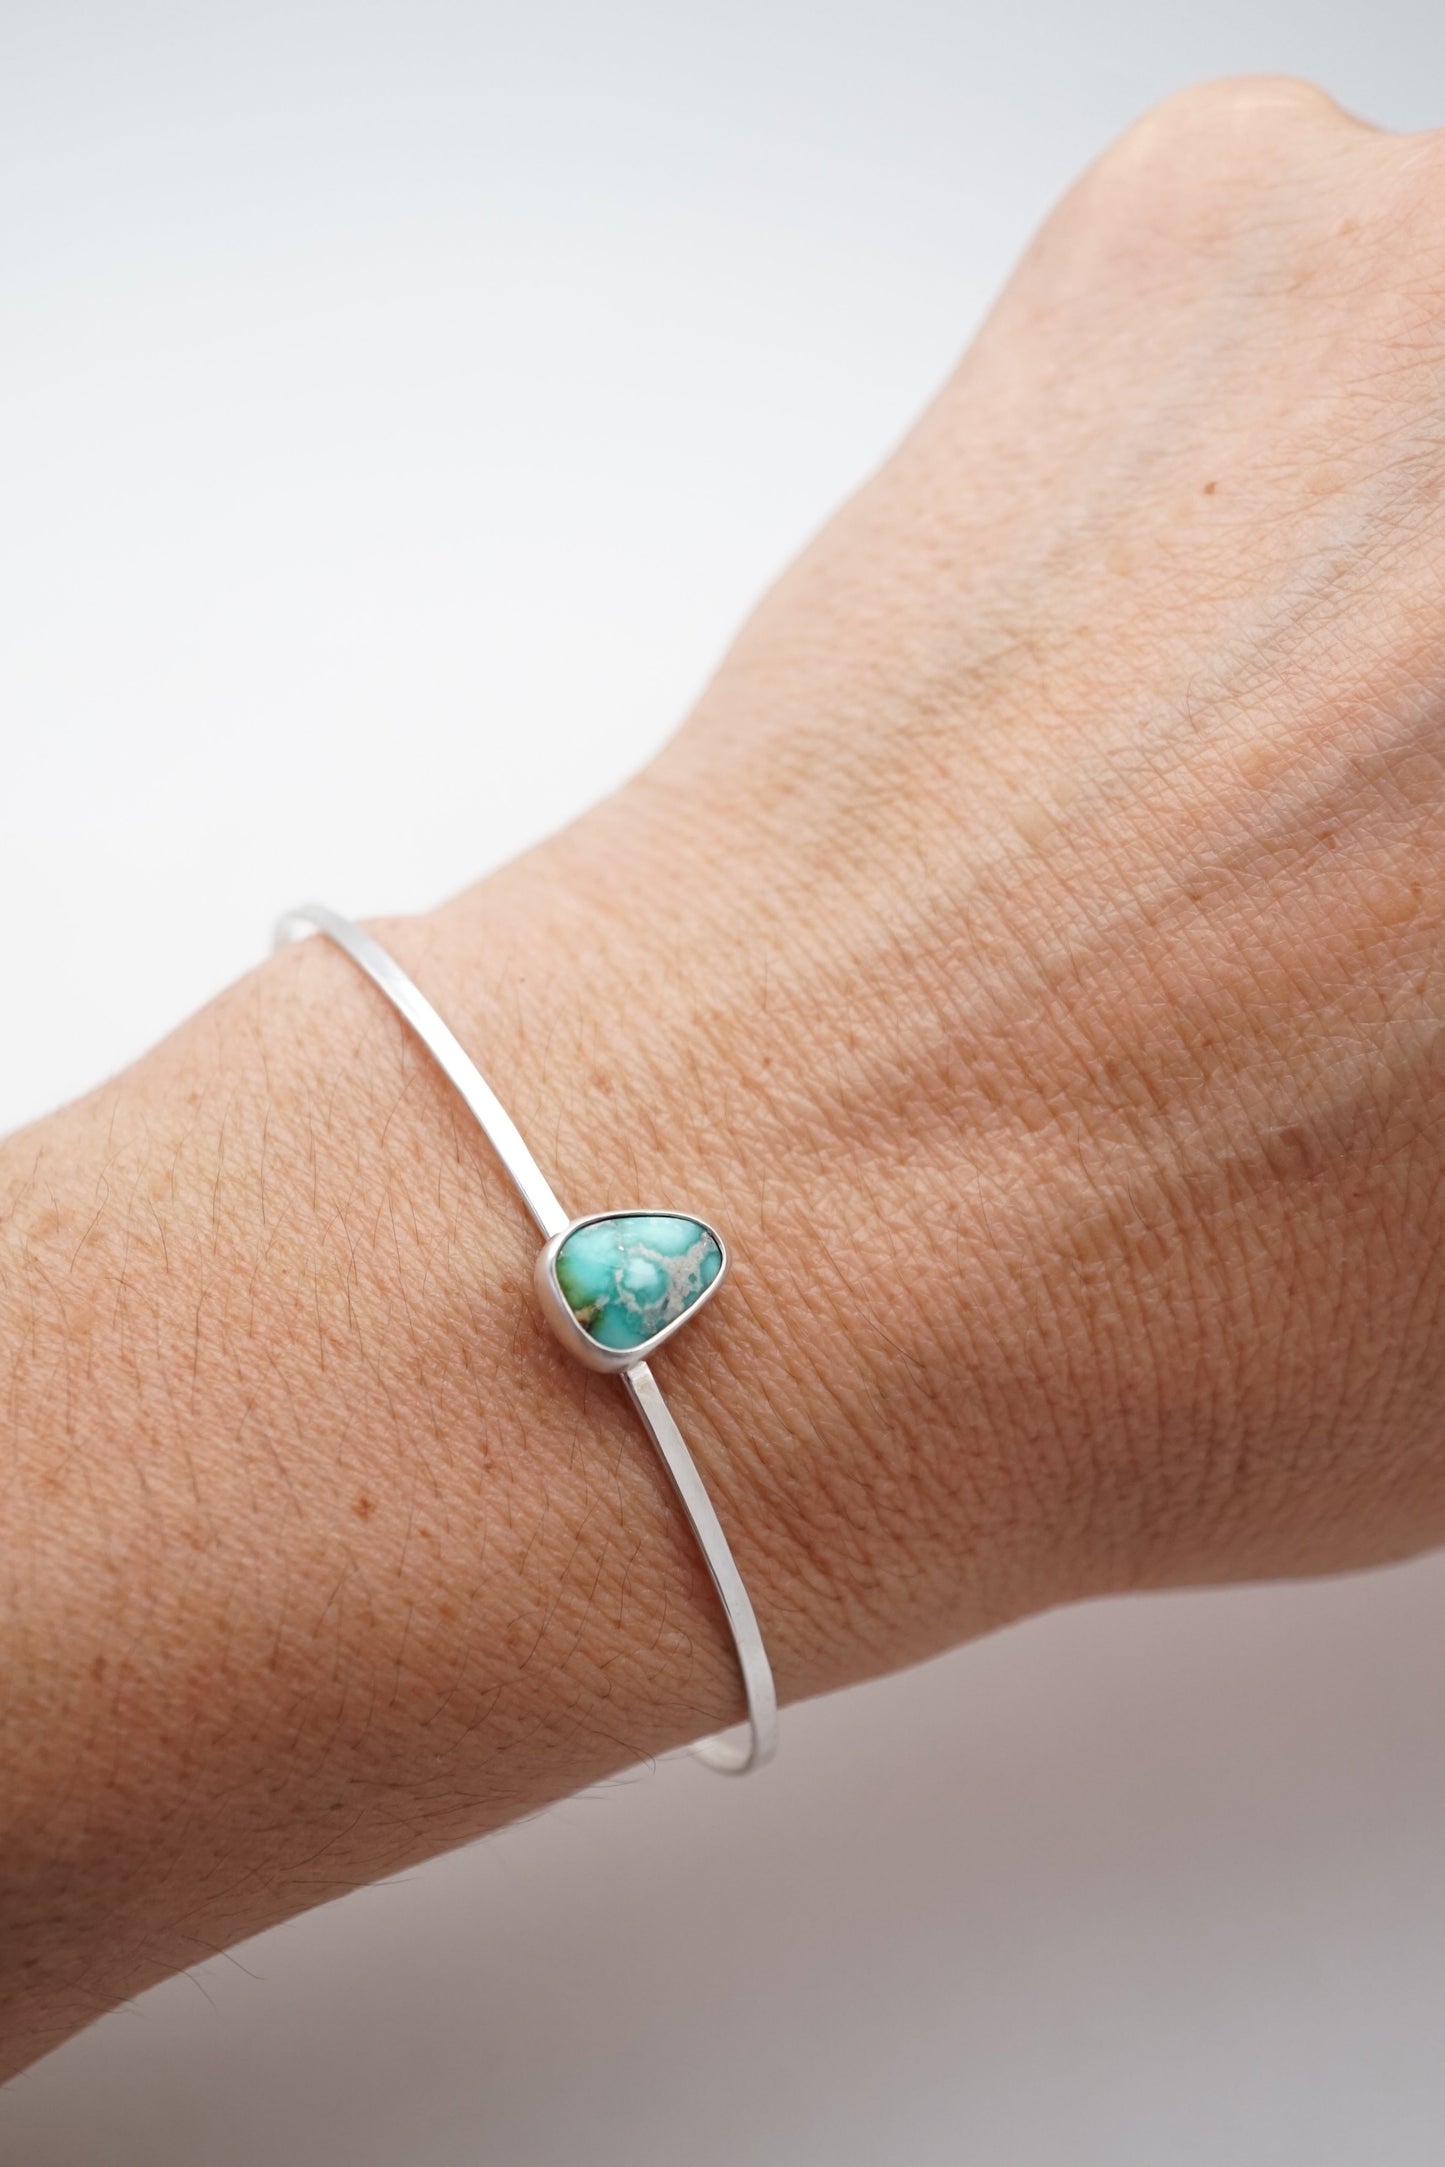 sonoran gold turquoise dainty cuff - discounted for imperfections - Lumenrose